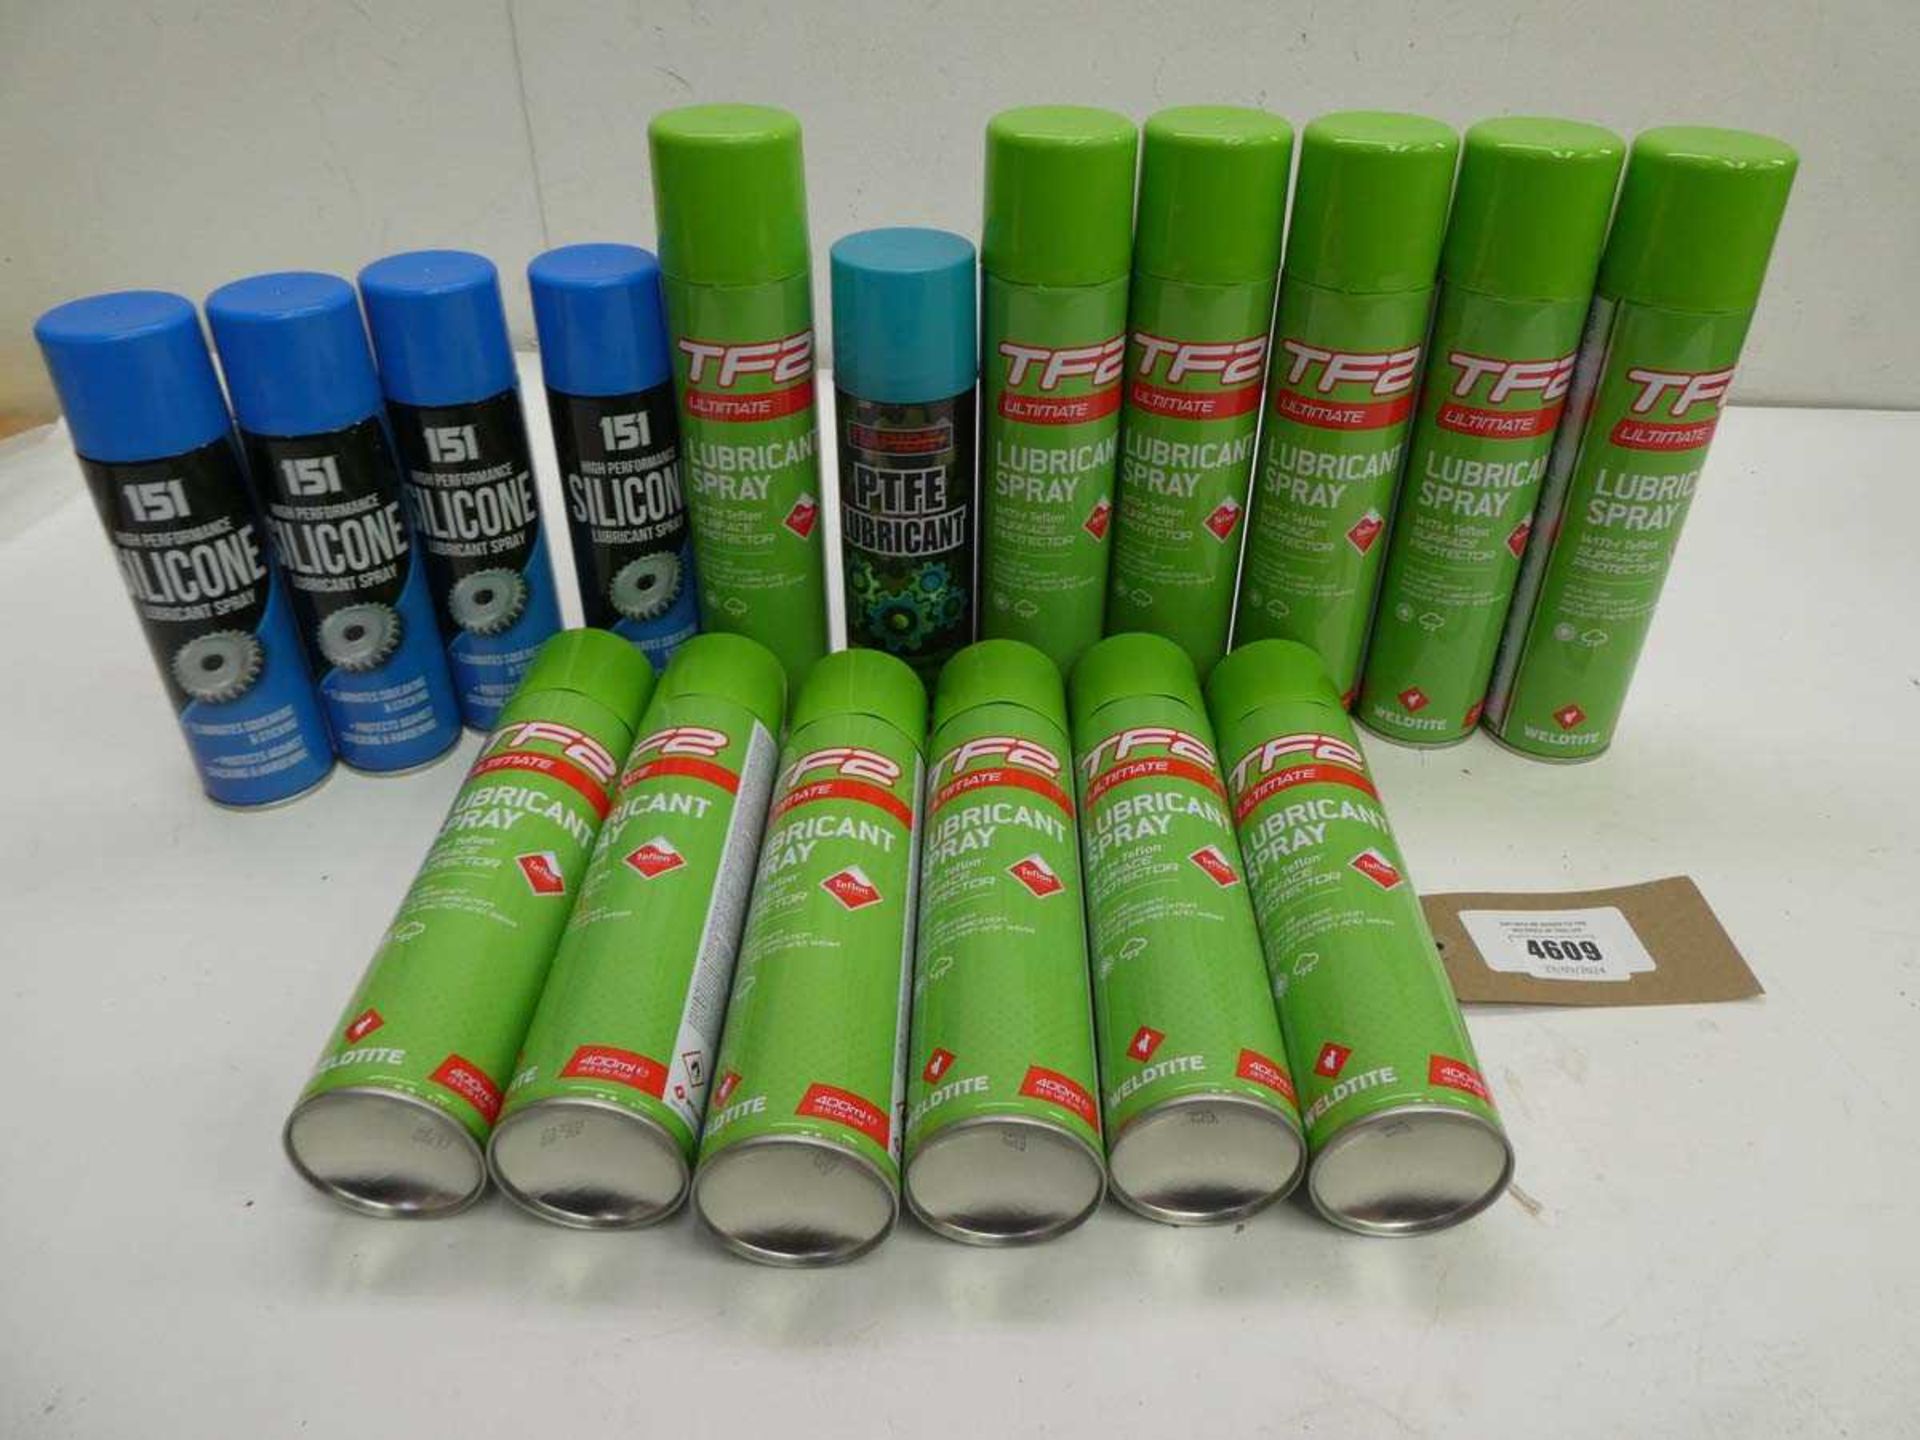 +VAT 151 Silicone lubricant sprays, PTFE lubricant and TF2 lubricant sprays